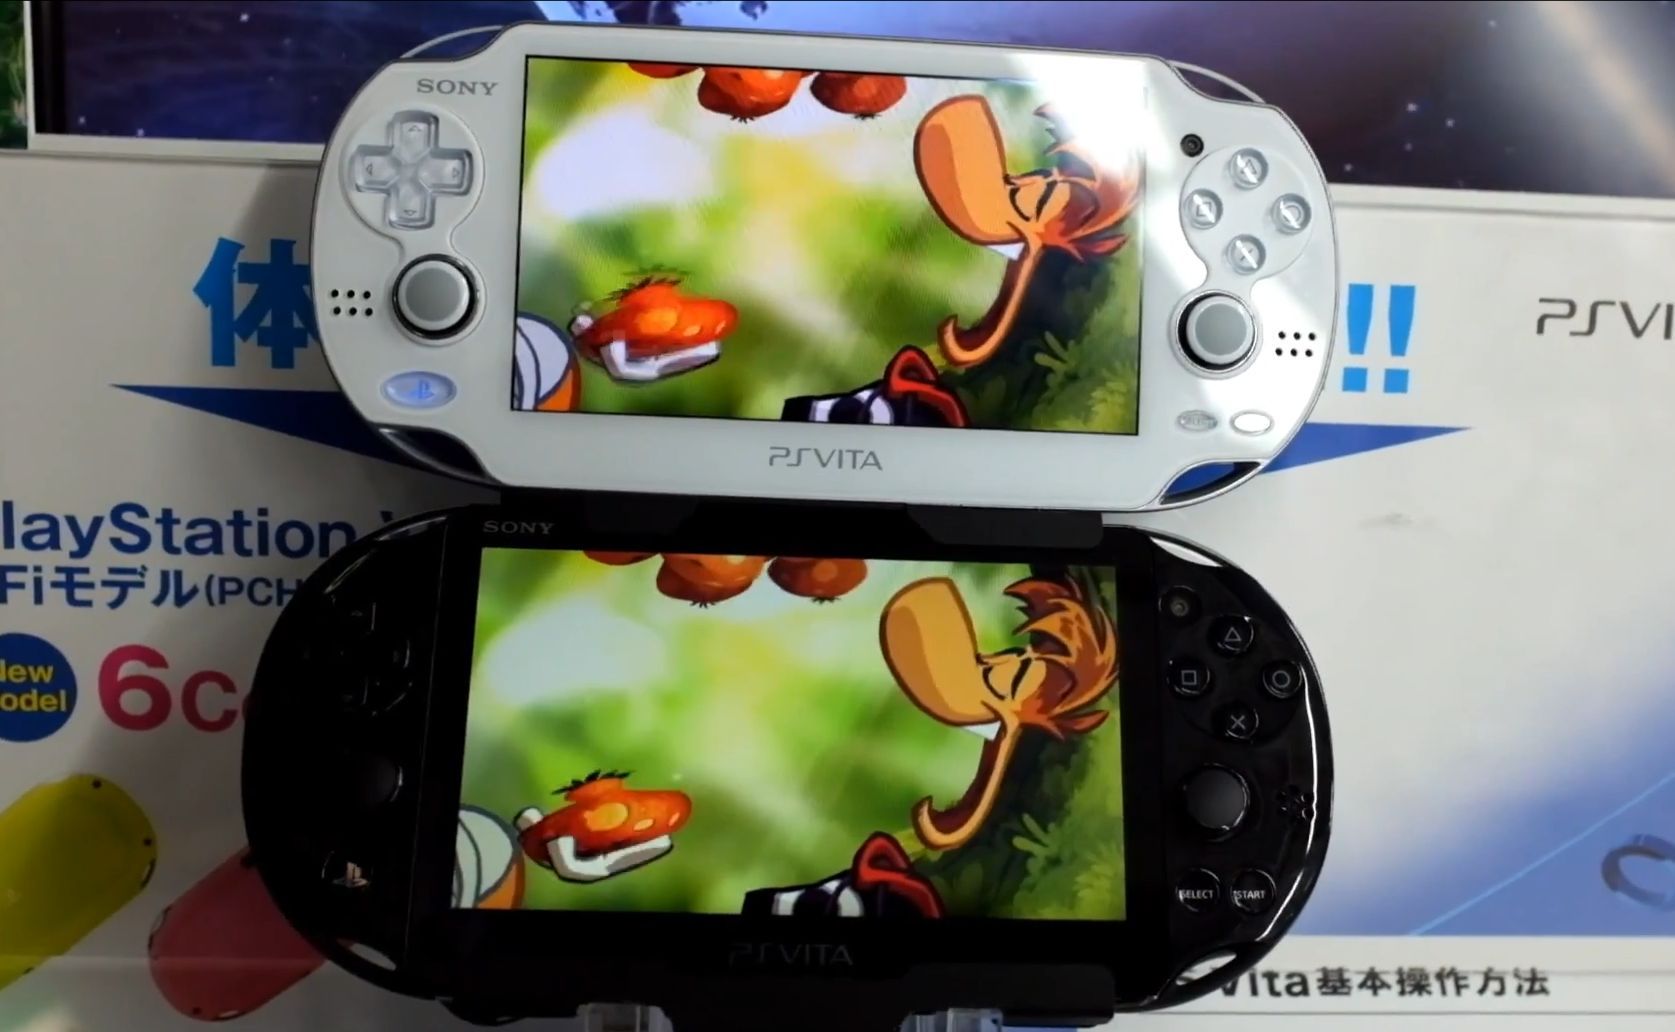 PS Vita 1000 OLED and Vita 2000 LCD Screen Difference Corrected by Japanese  Developer Via Tint Filter